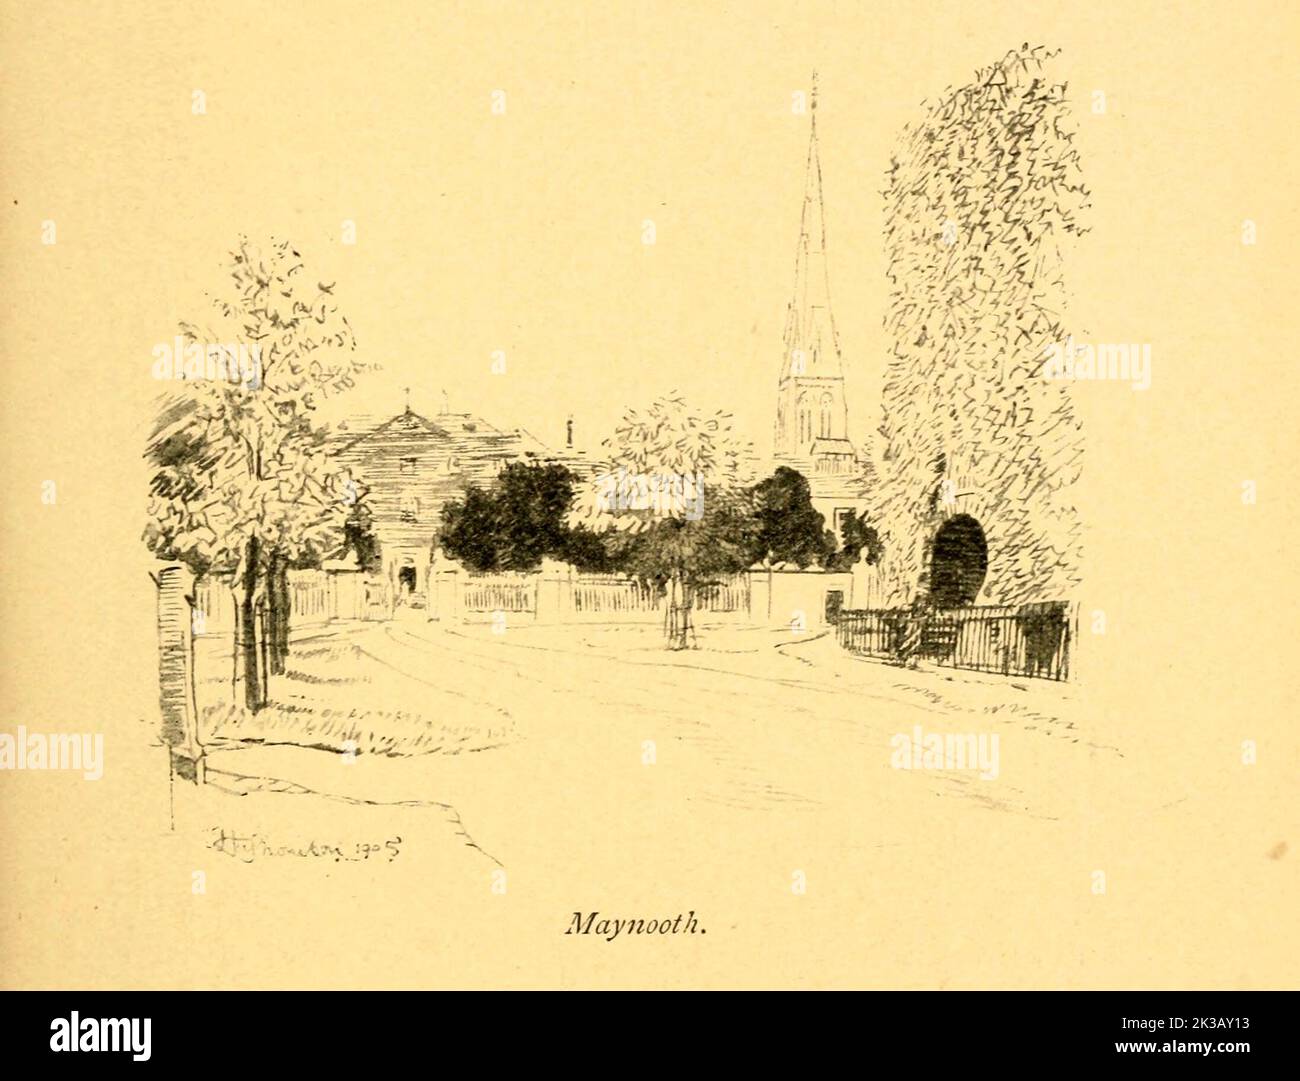 Maynooth is a university town in north County Kildare, Ireland. illustrated by Hugh Thomson from the book ' The famous cities of Ireland ' by Gwynn, Stephen Lucius, Publisher: Publisher: Dublin, Maunsel & Co., ; New York, The Macmillan Co 1915 Stock Photo